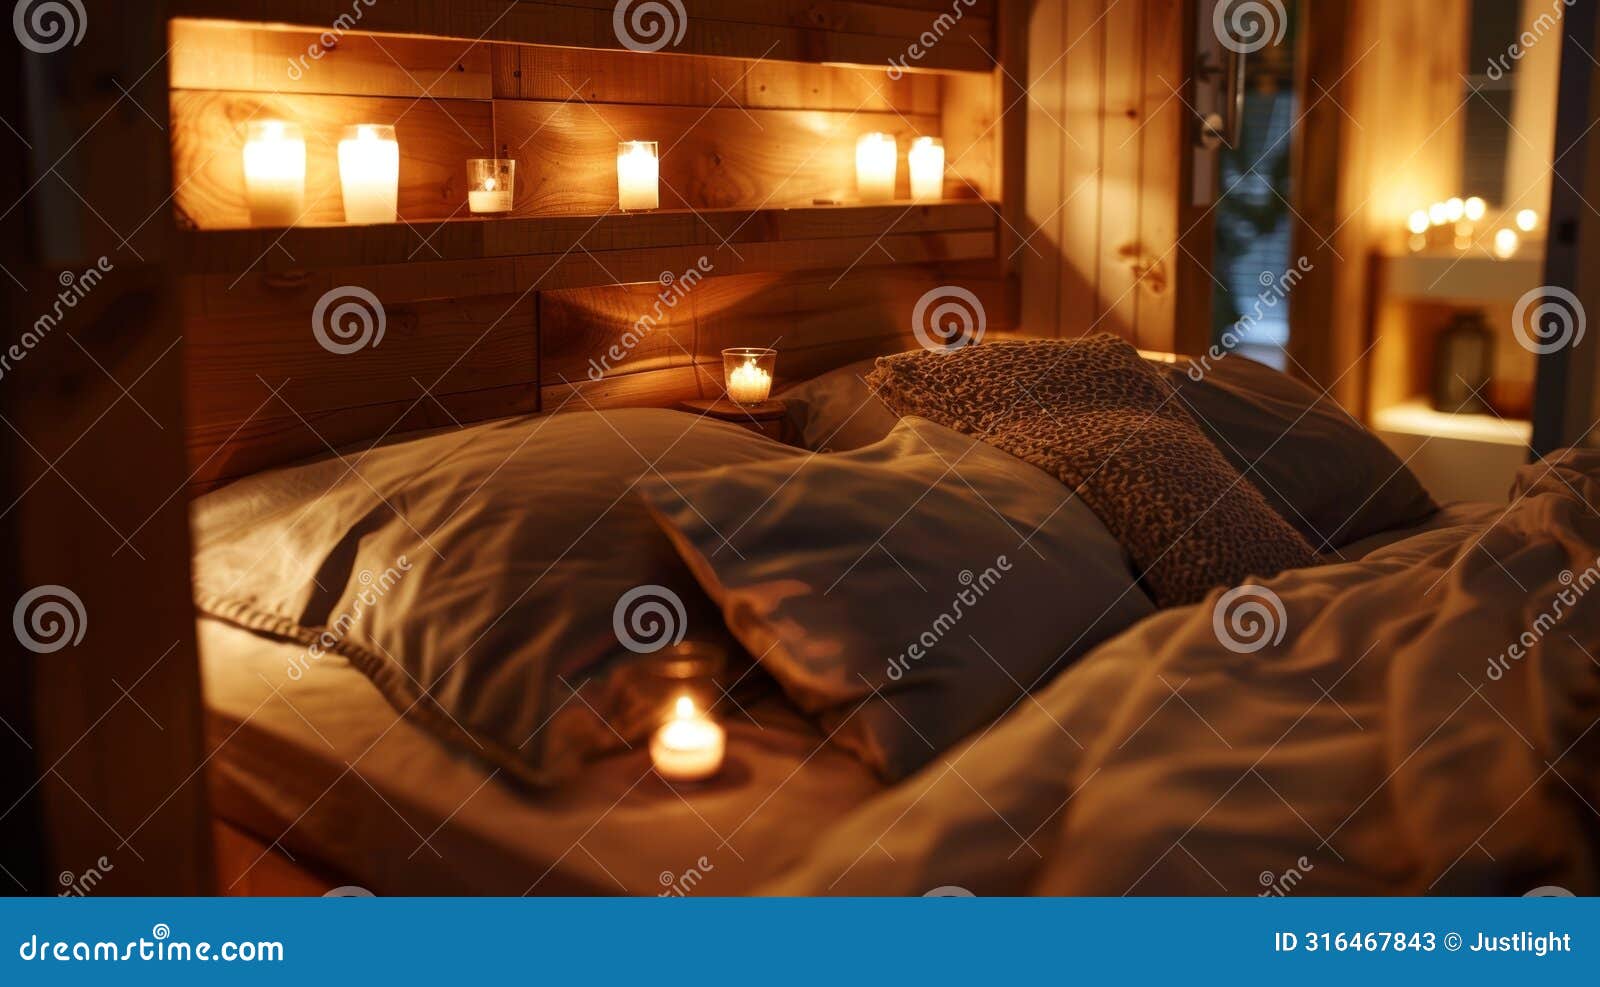 a cozy bedroom is lit by alcoves in the wooden headboard each housing a small candle that adds a touch of romance to the